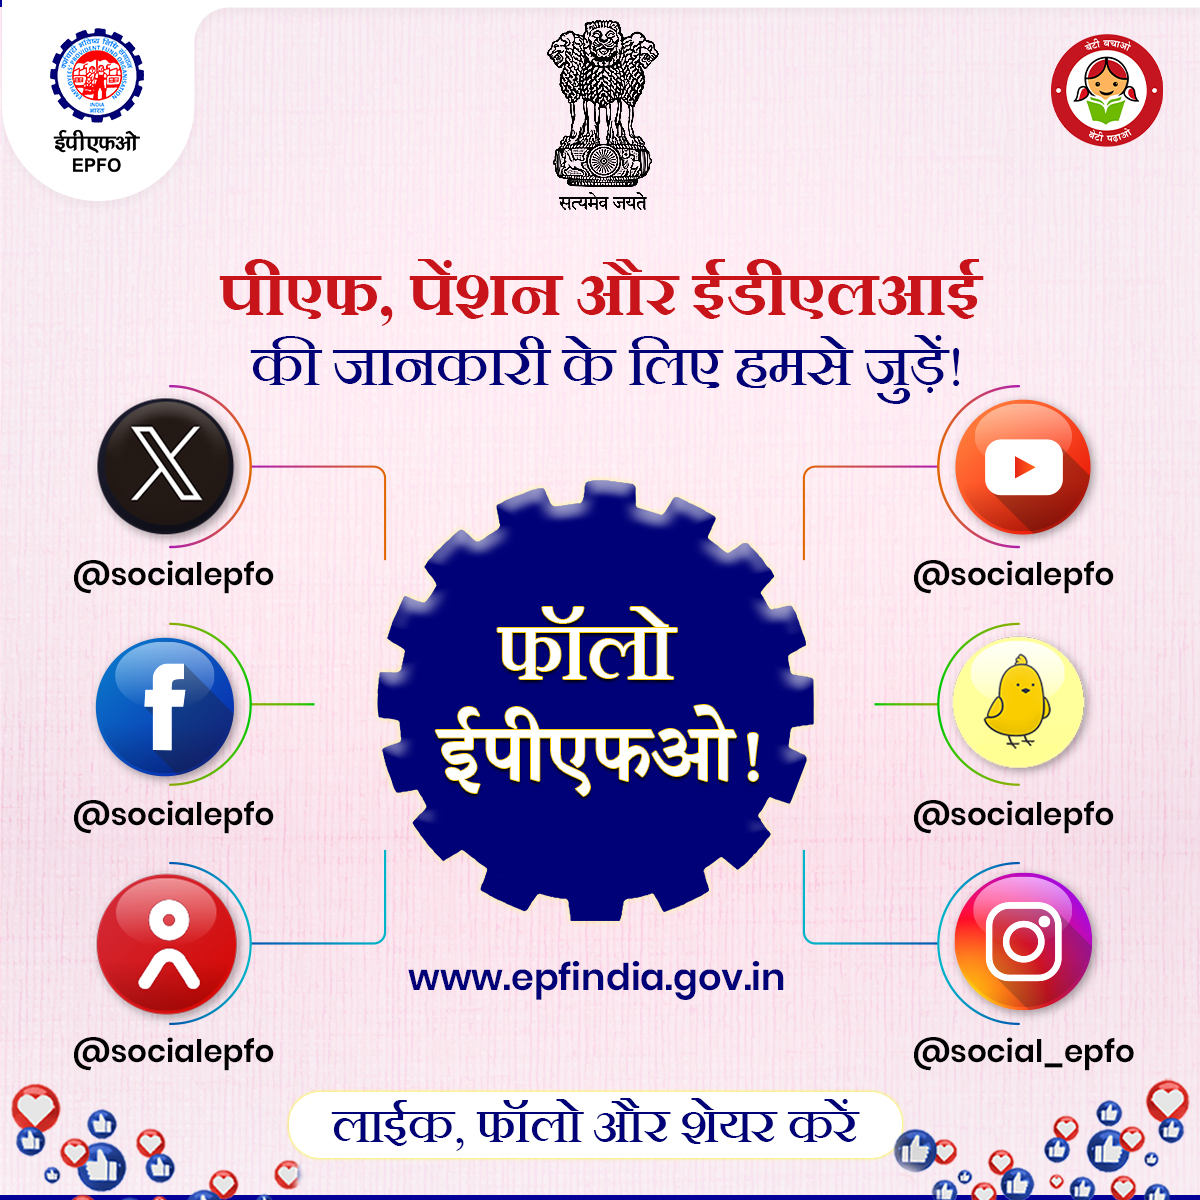 Follow our social media to stay updated on latest news about Provident Fund, Insurance Scheme, and Pension Scheme. #EPFO #PF #EPFOwithYou #HumHainNa #ईपीएफओ #ईपीएफ #EDLI #EPS #Insurance